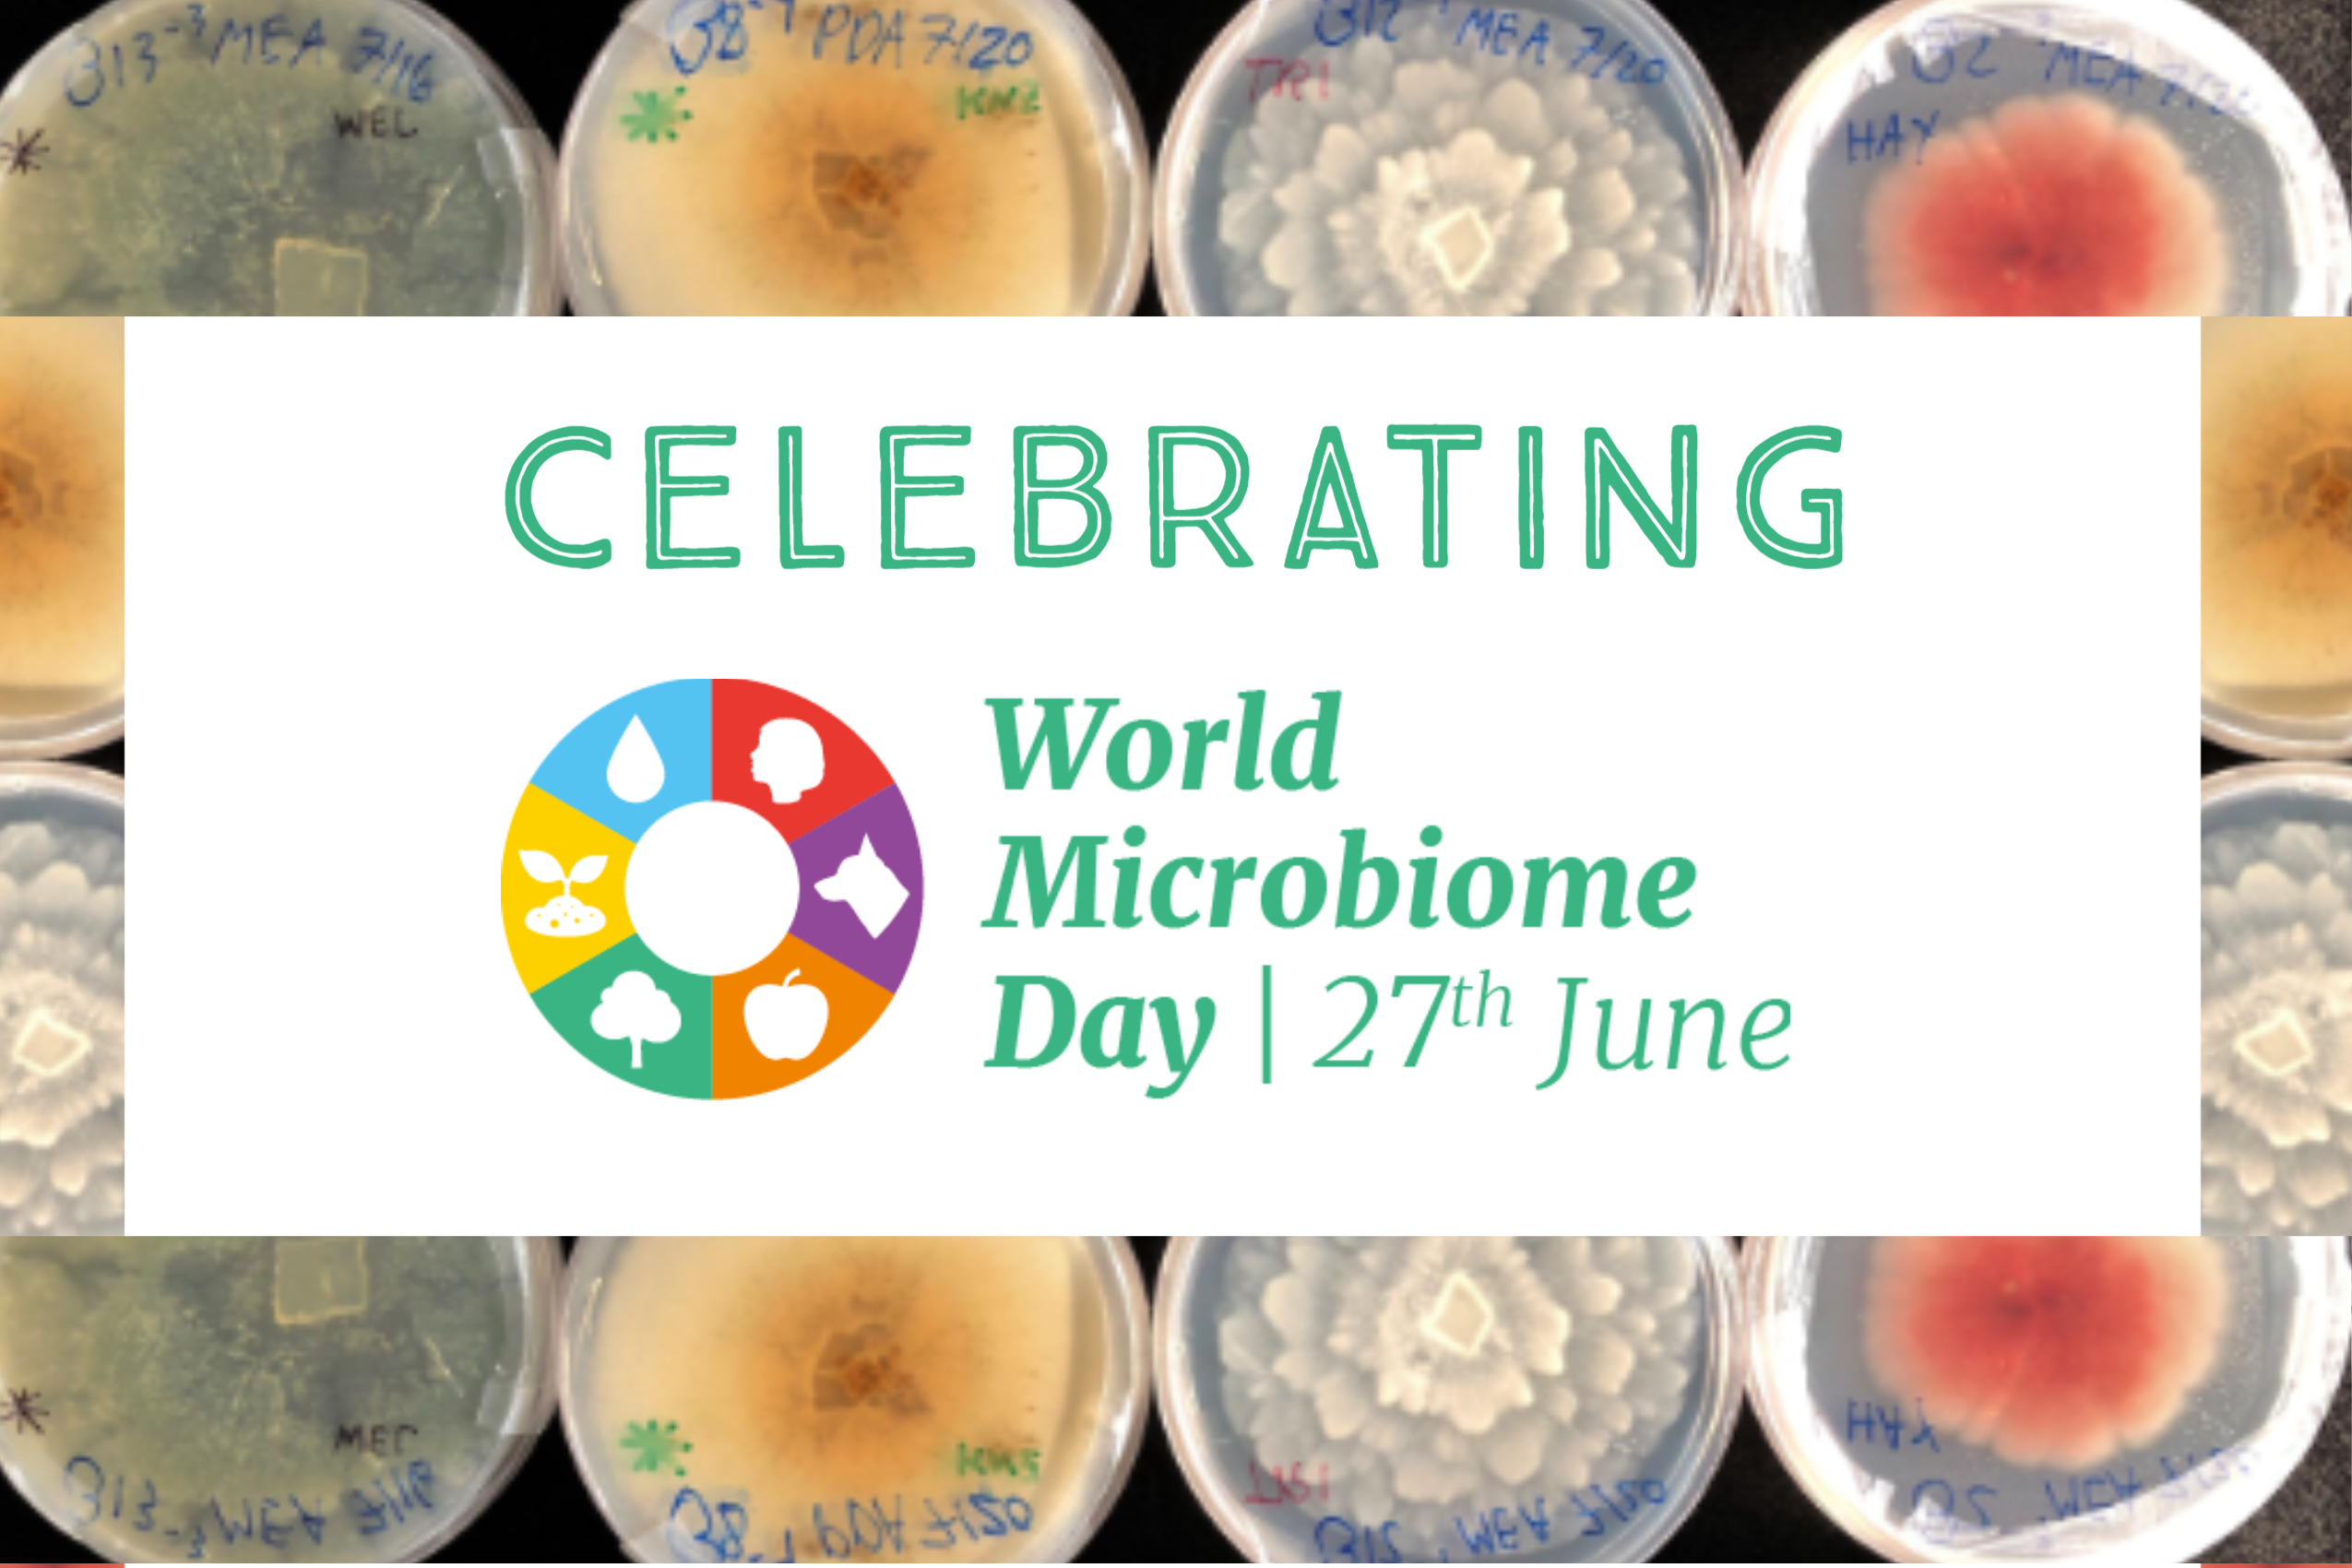 Microbiome day June 27